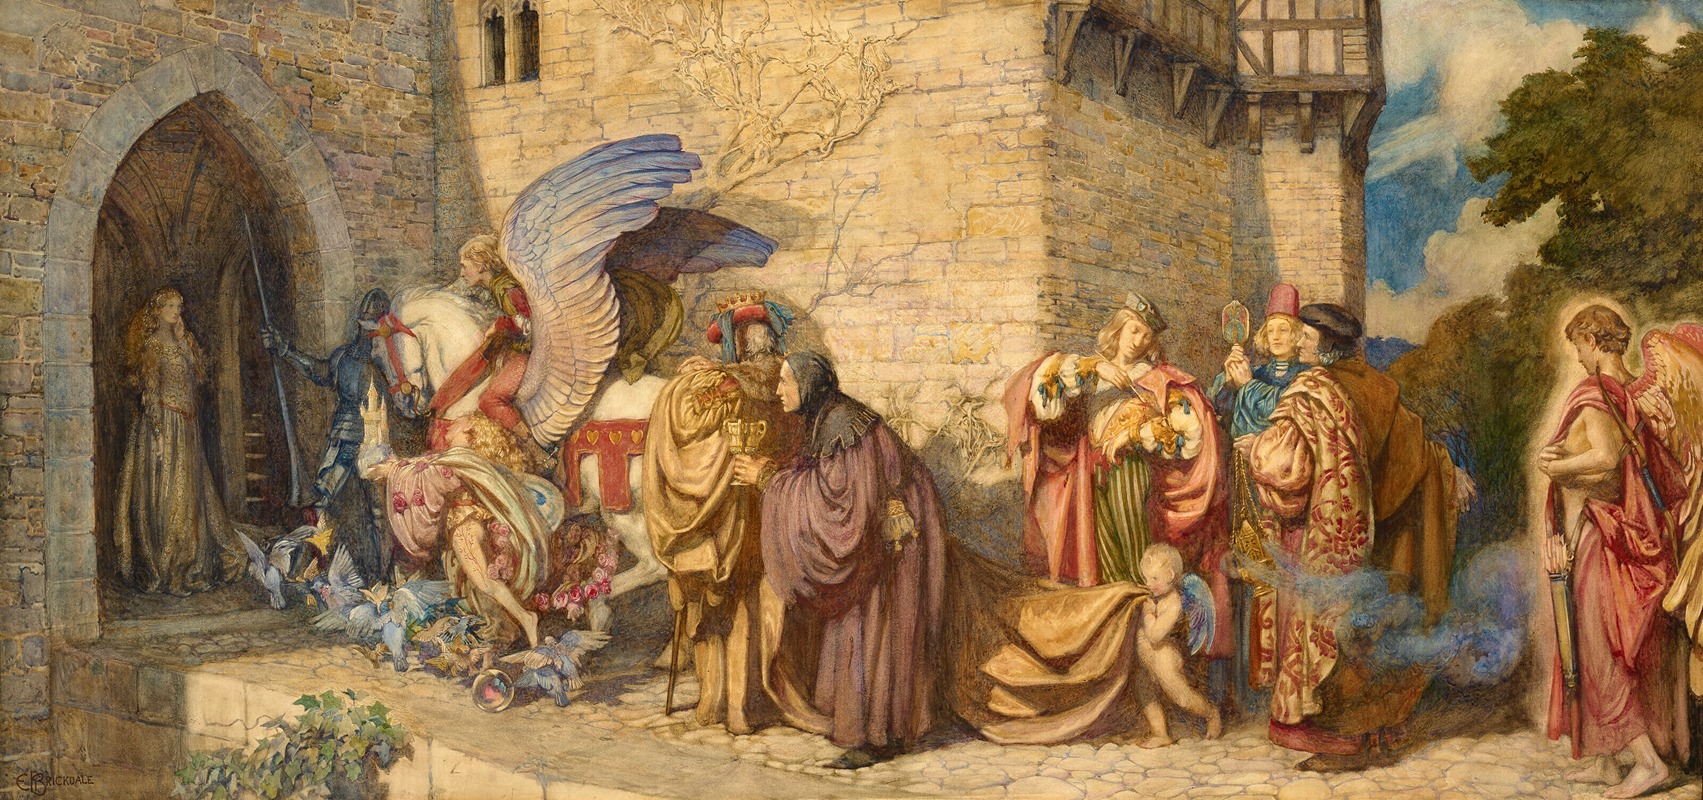 Eleanor Fortescue-Brickdale - Love and his Counterfeits